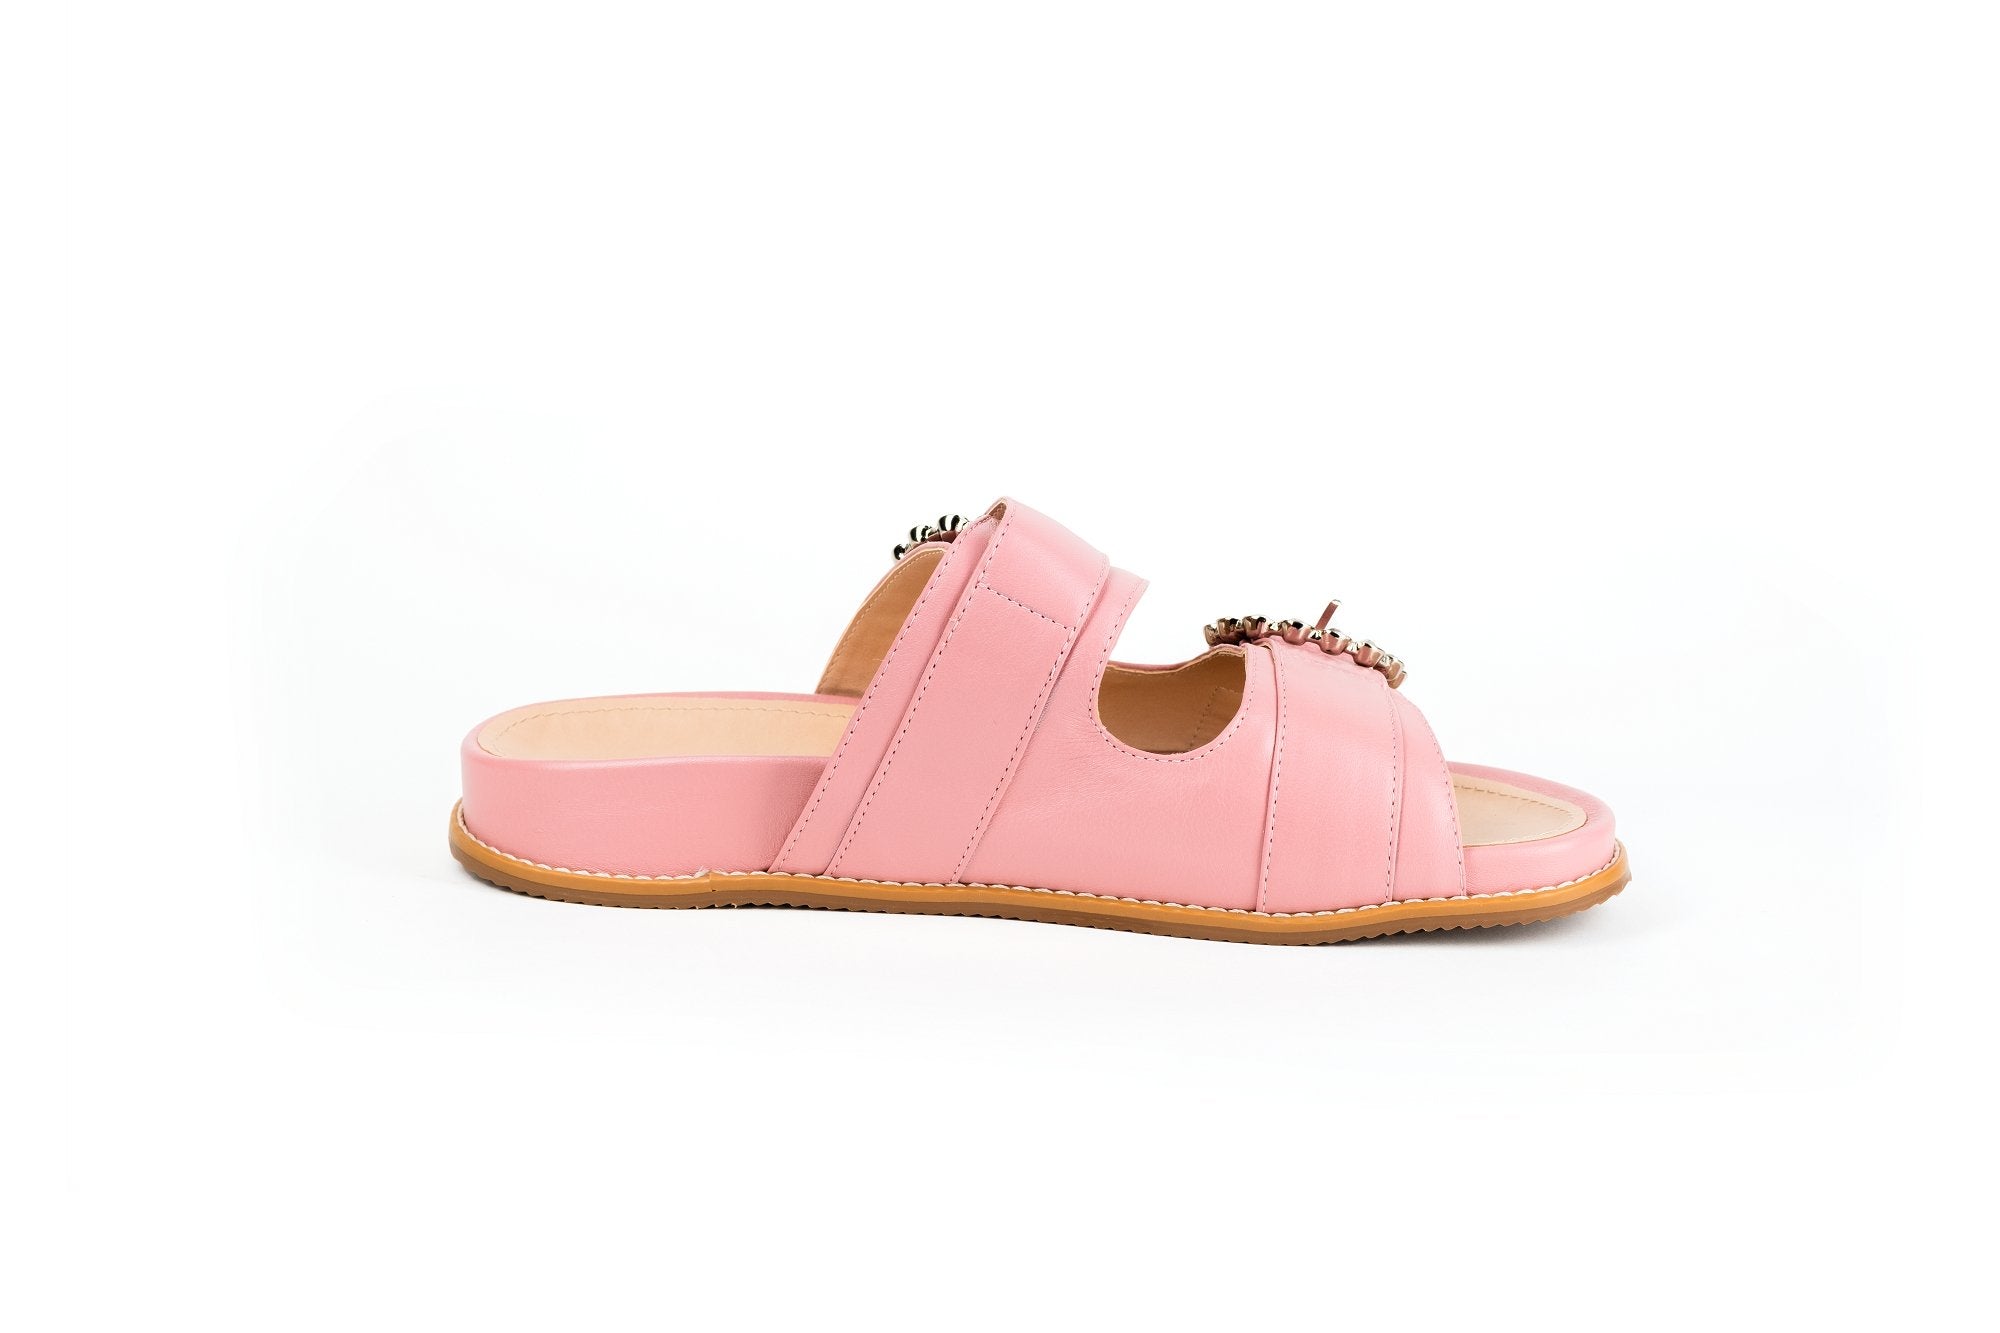 Urban Slides Pink Flats by Sole Shoes NZ F25P-36